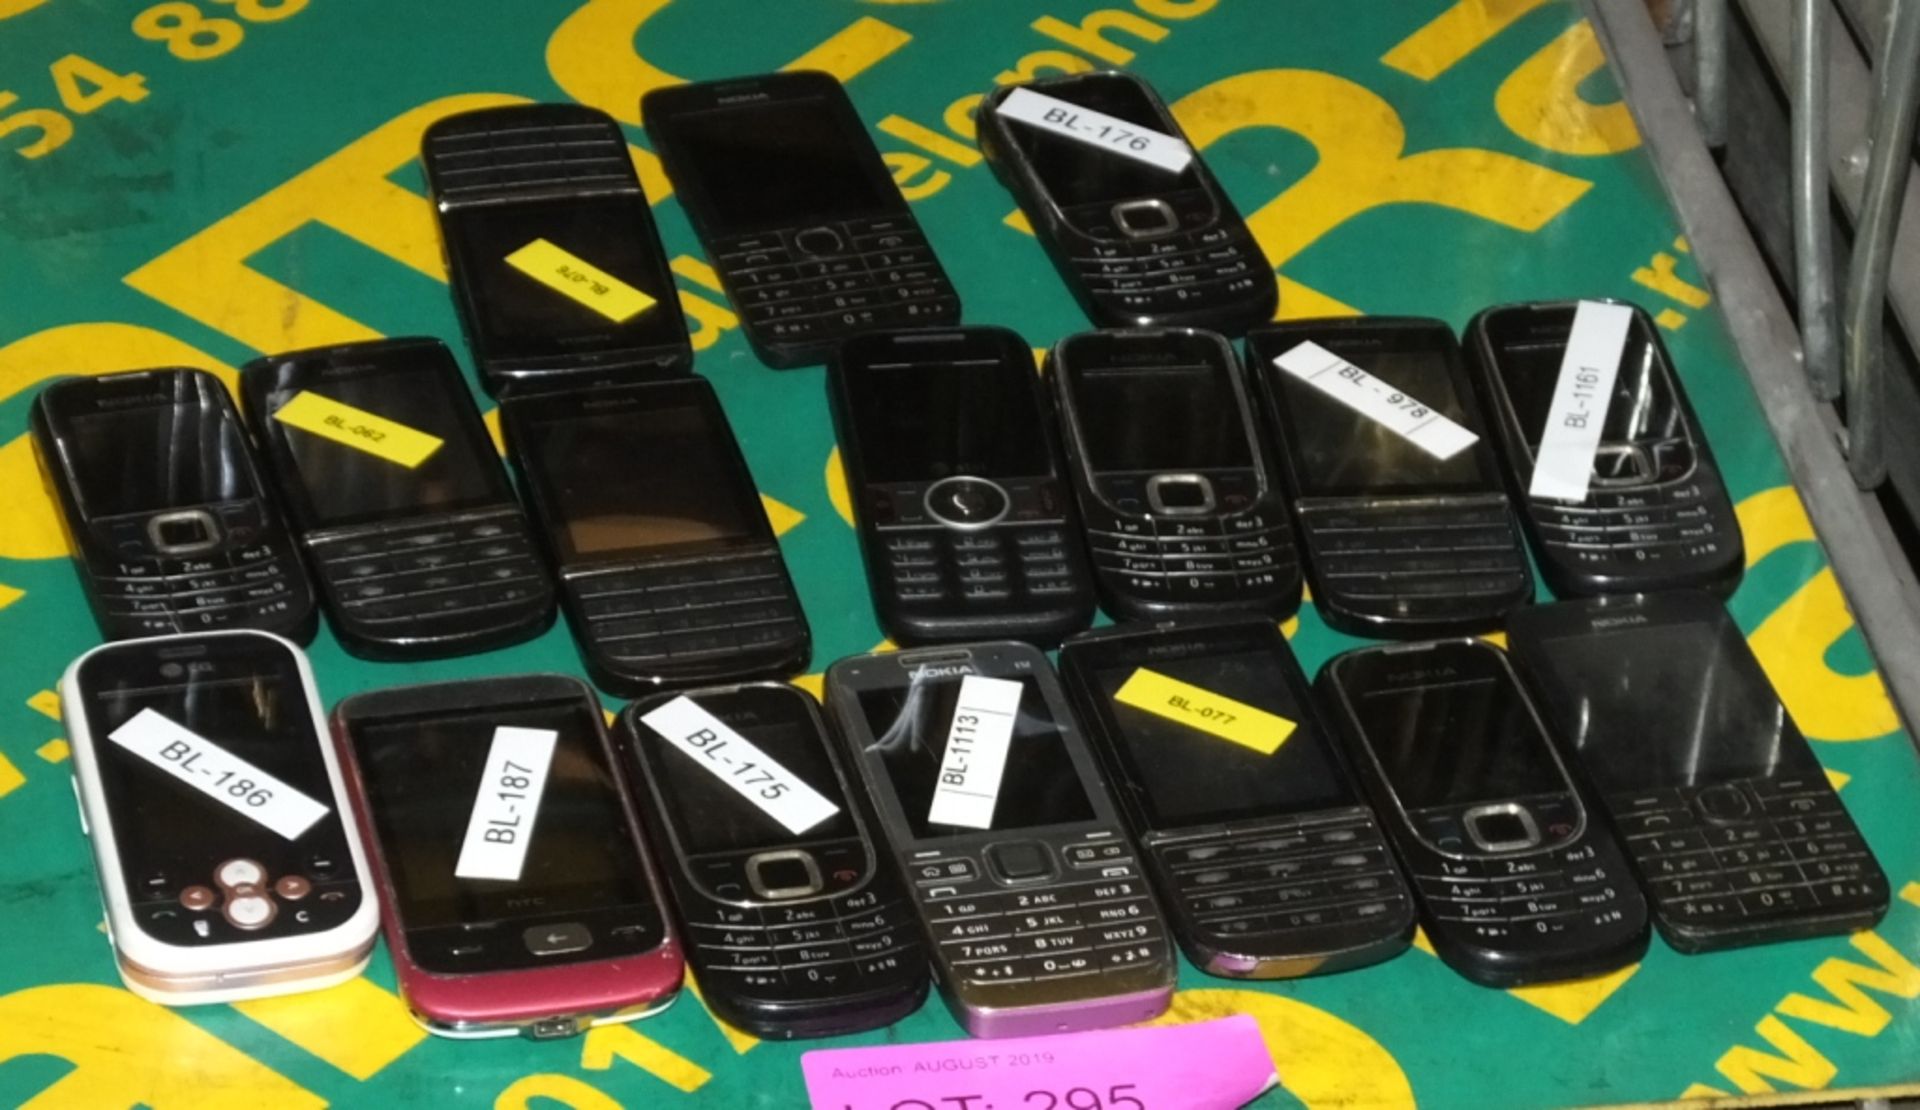 17x Assorted Mobile Phones